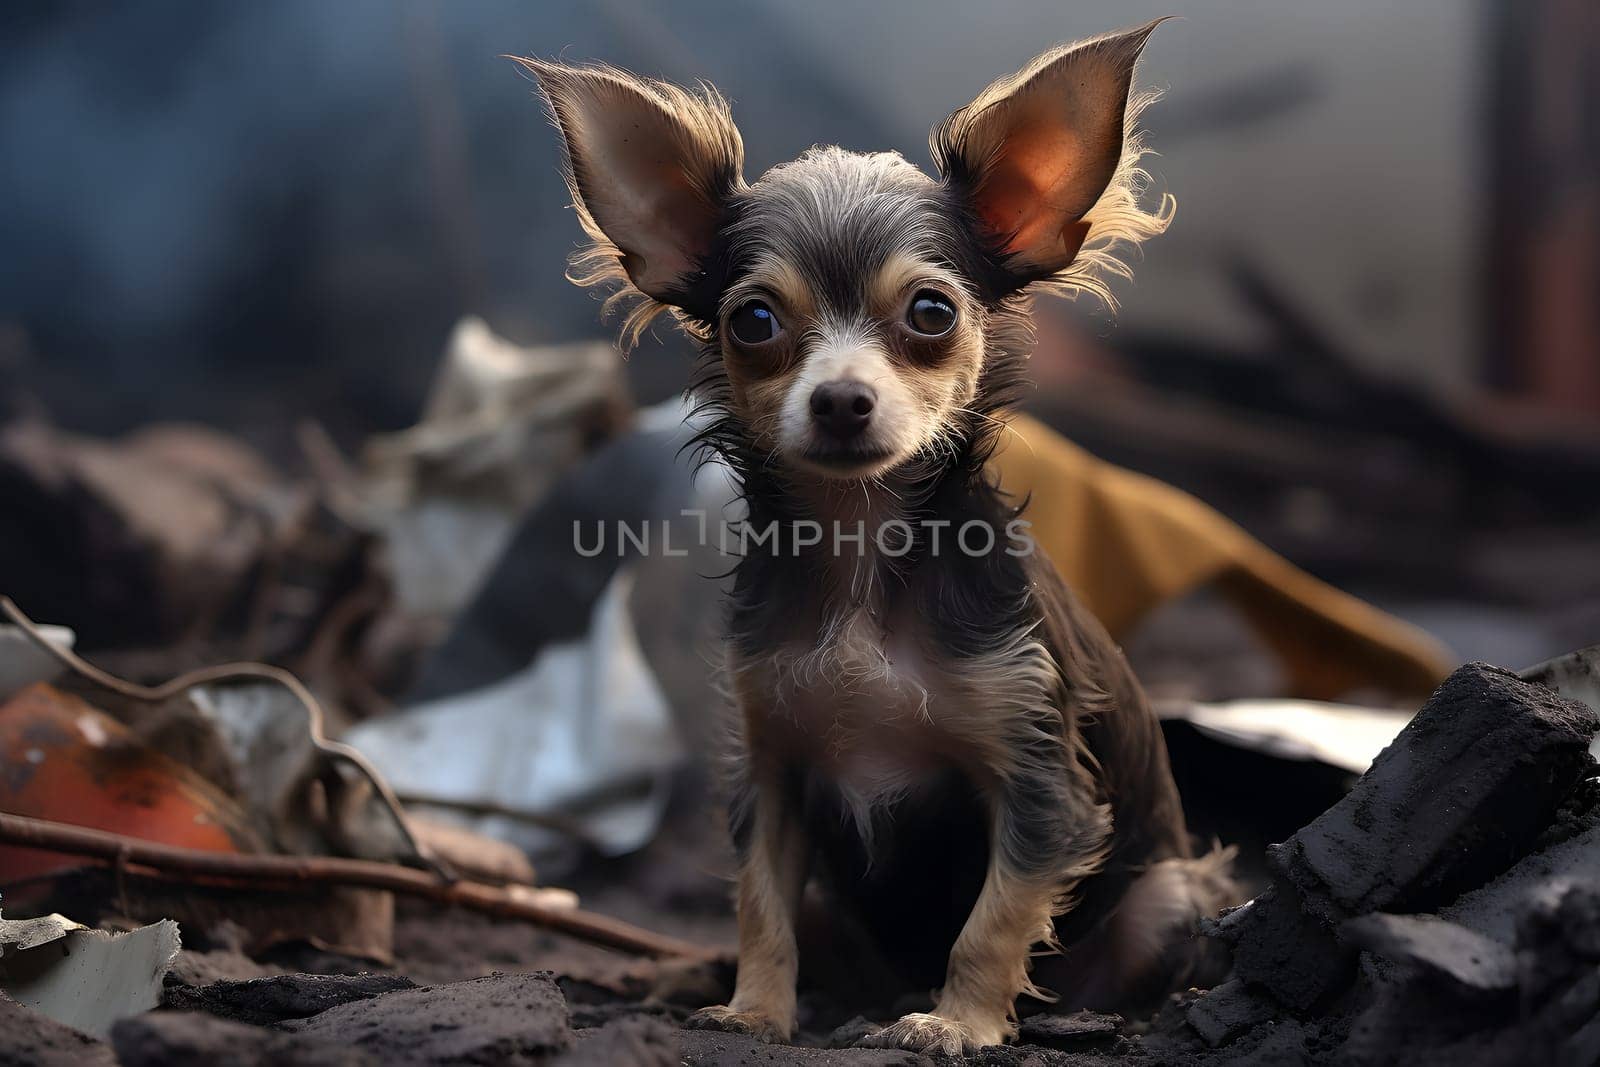 Alone and hungry chihuahua after disaster on the background of house rubble. Neural network generated image. Not based on any actual scene.